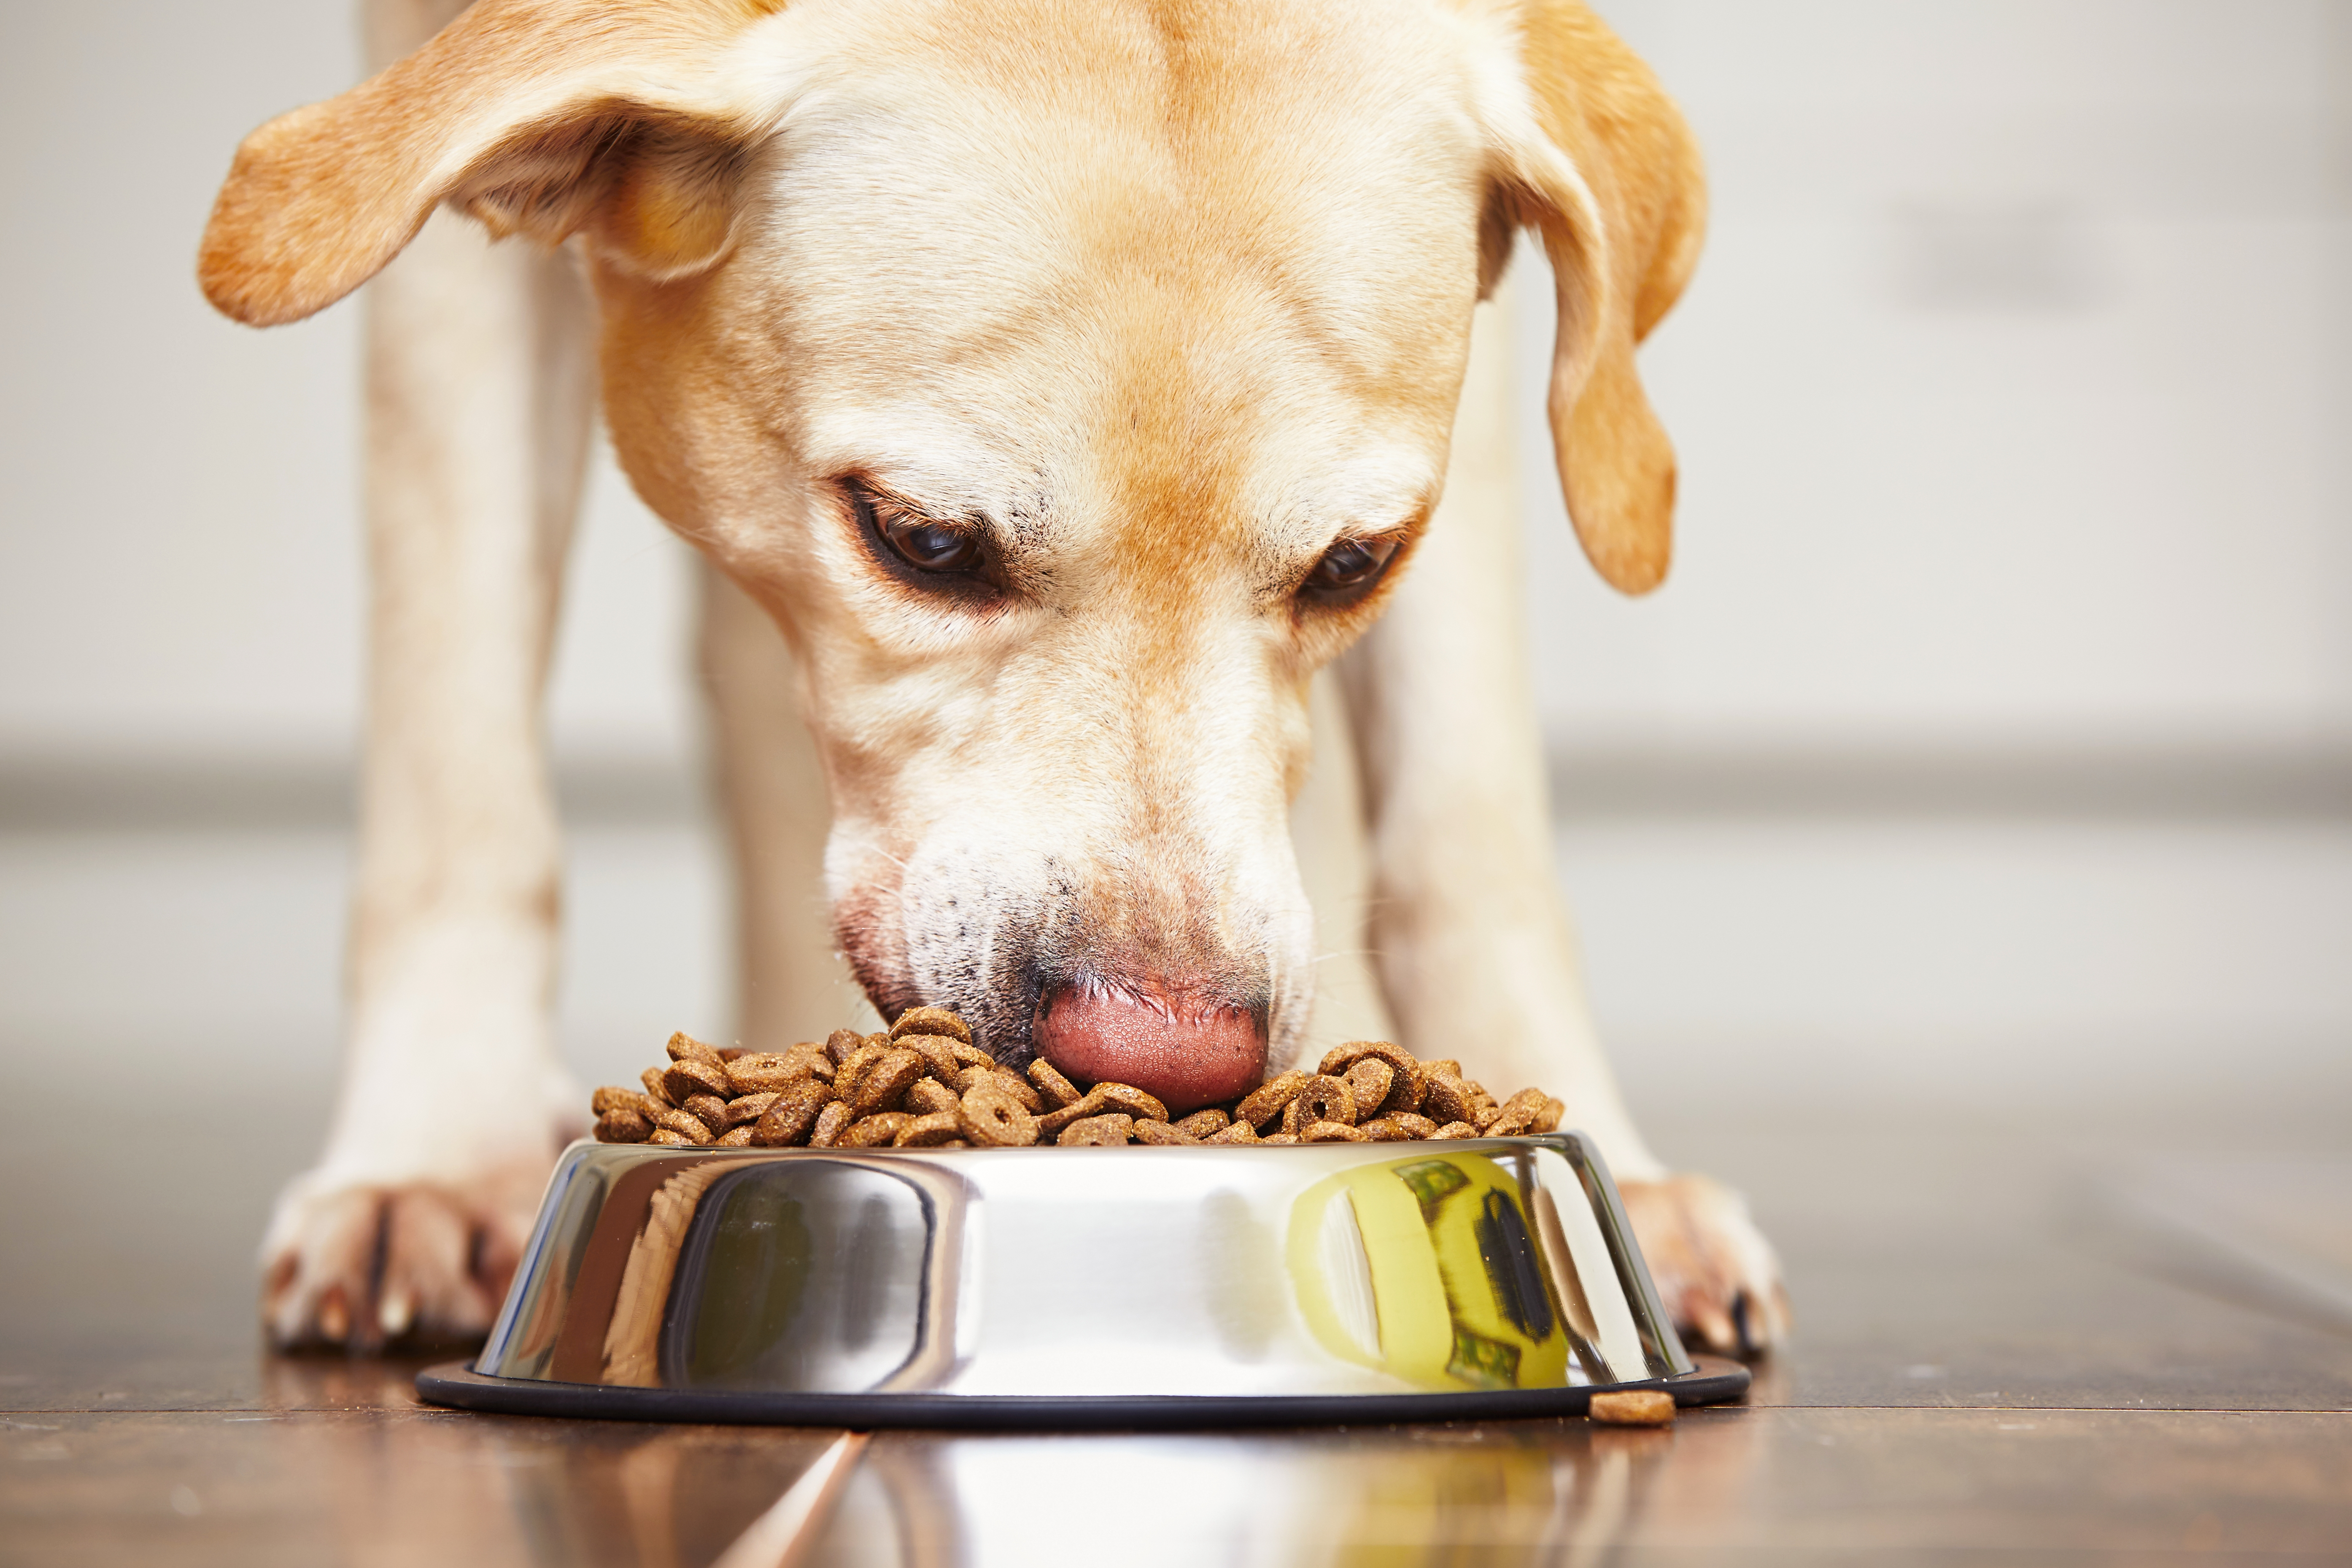 Your dog and cat's food containers could be coated with toxic chemicals, but you can help researchers find out for sure by submitting a sample to the Green Science Policy Institute.
(Chalabala / iStock / Getty Images Plus)